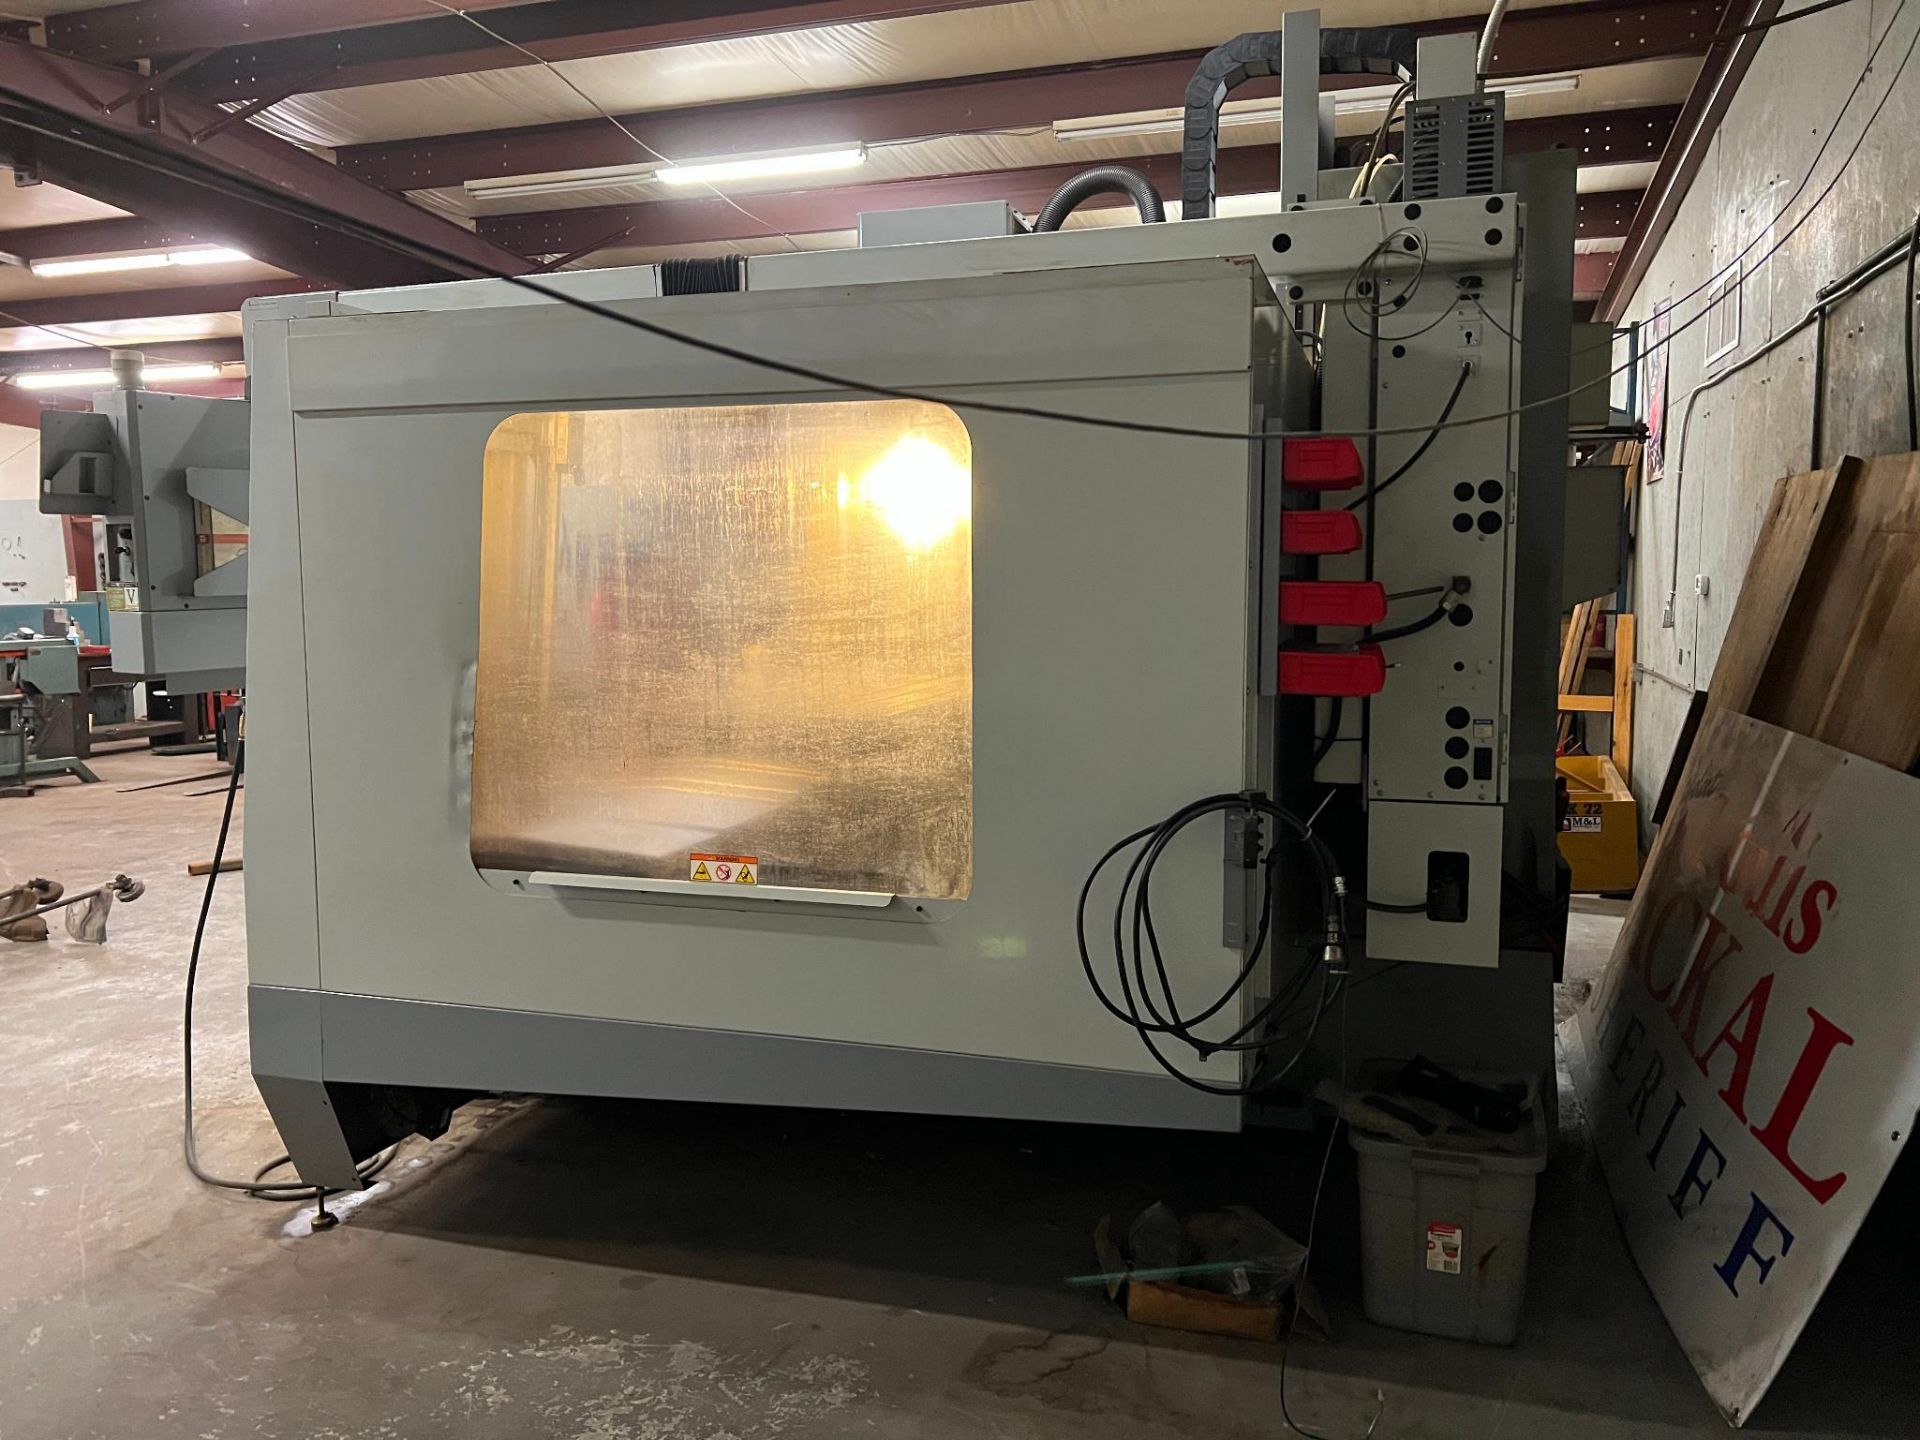 2007 Haas VR-8 5-Axis CNC Vertical Machining Center Serial Number: 1057089 X-Axis Travel: 64" Y-Axis - Image 7 of 37